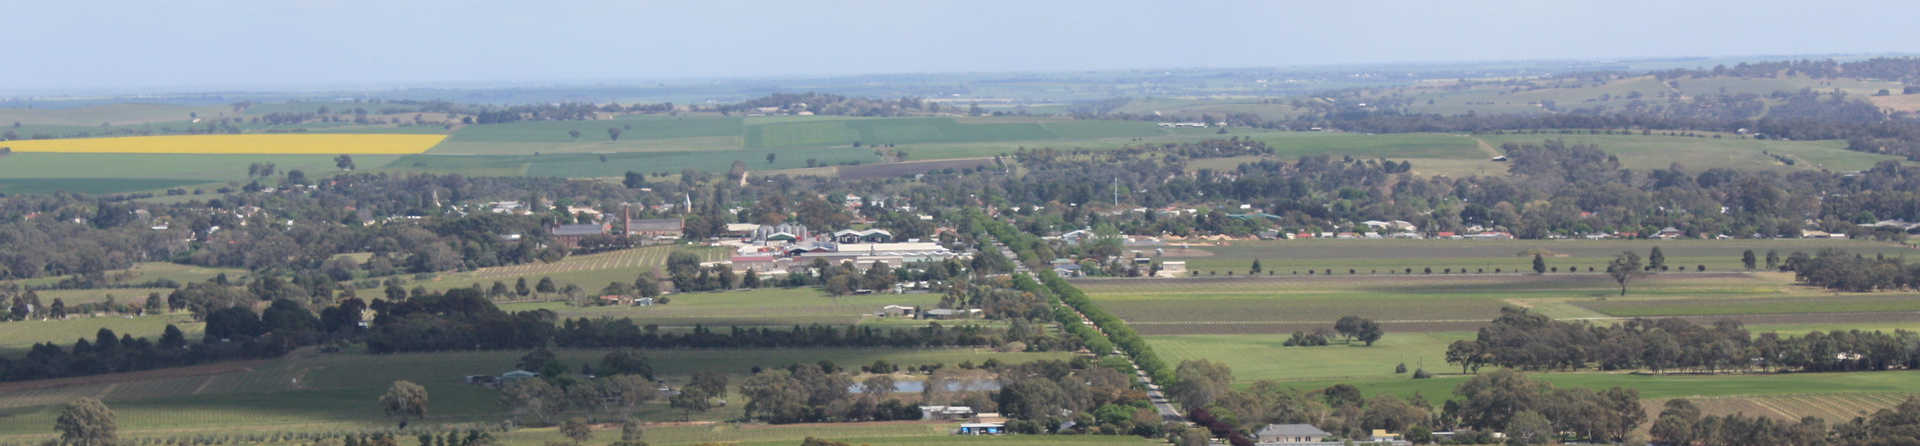 What towns are in the Barossa Valley?